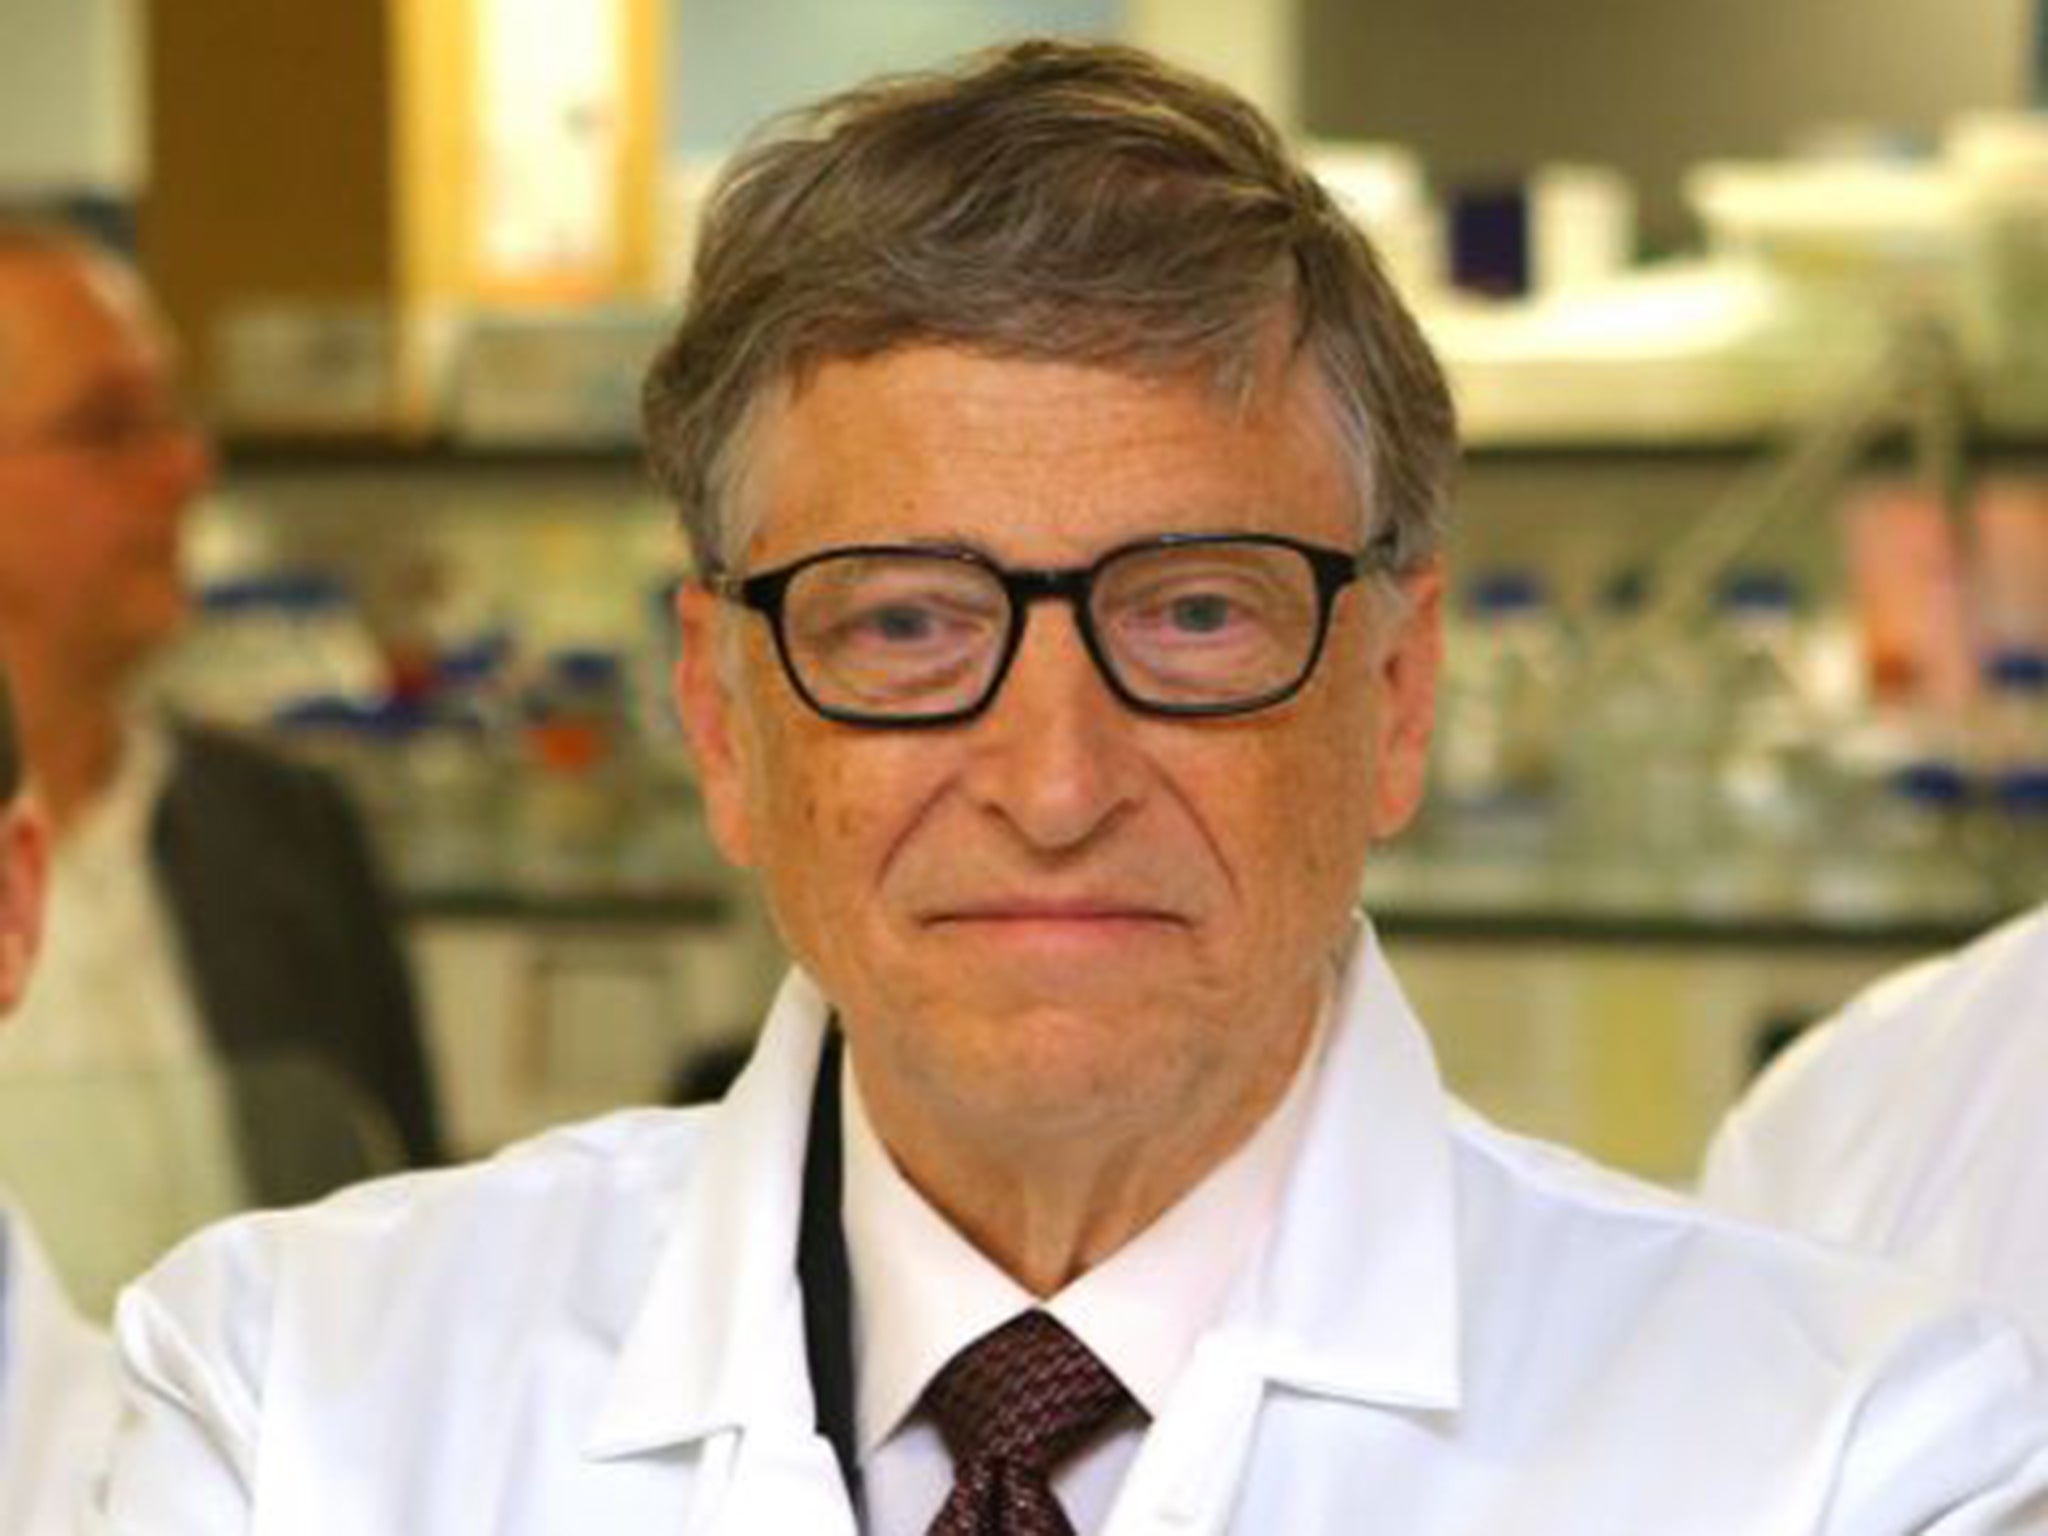 Bill Gates visits the Liverpool School of Tropical Medicine in Britain